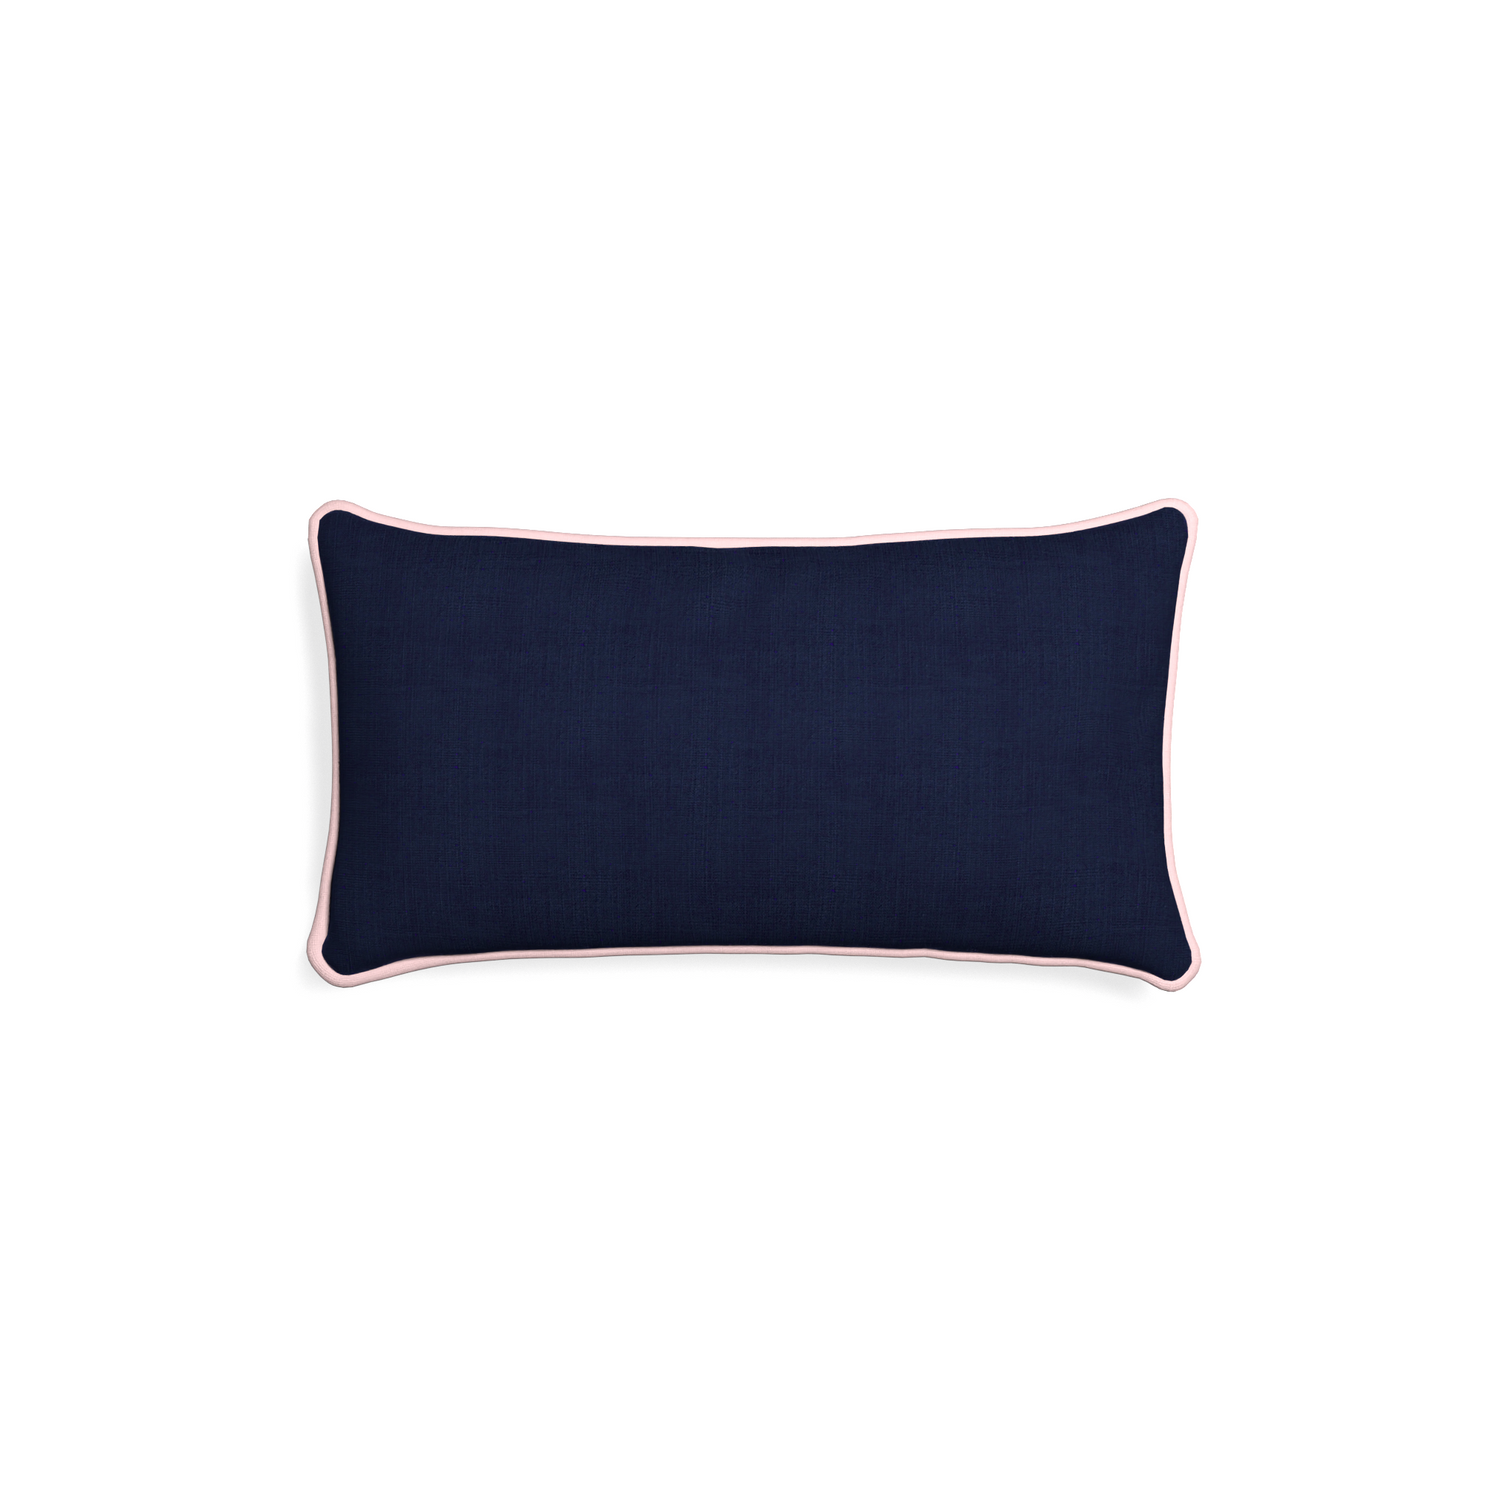 Petite-lumbar midnight custom navy bluepillow with petal piping on white background